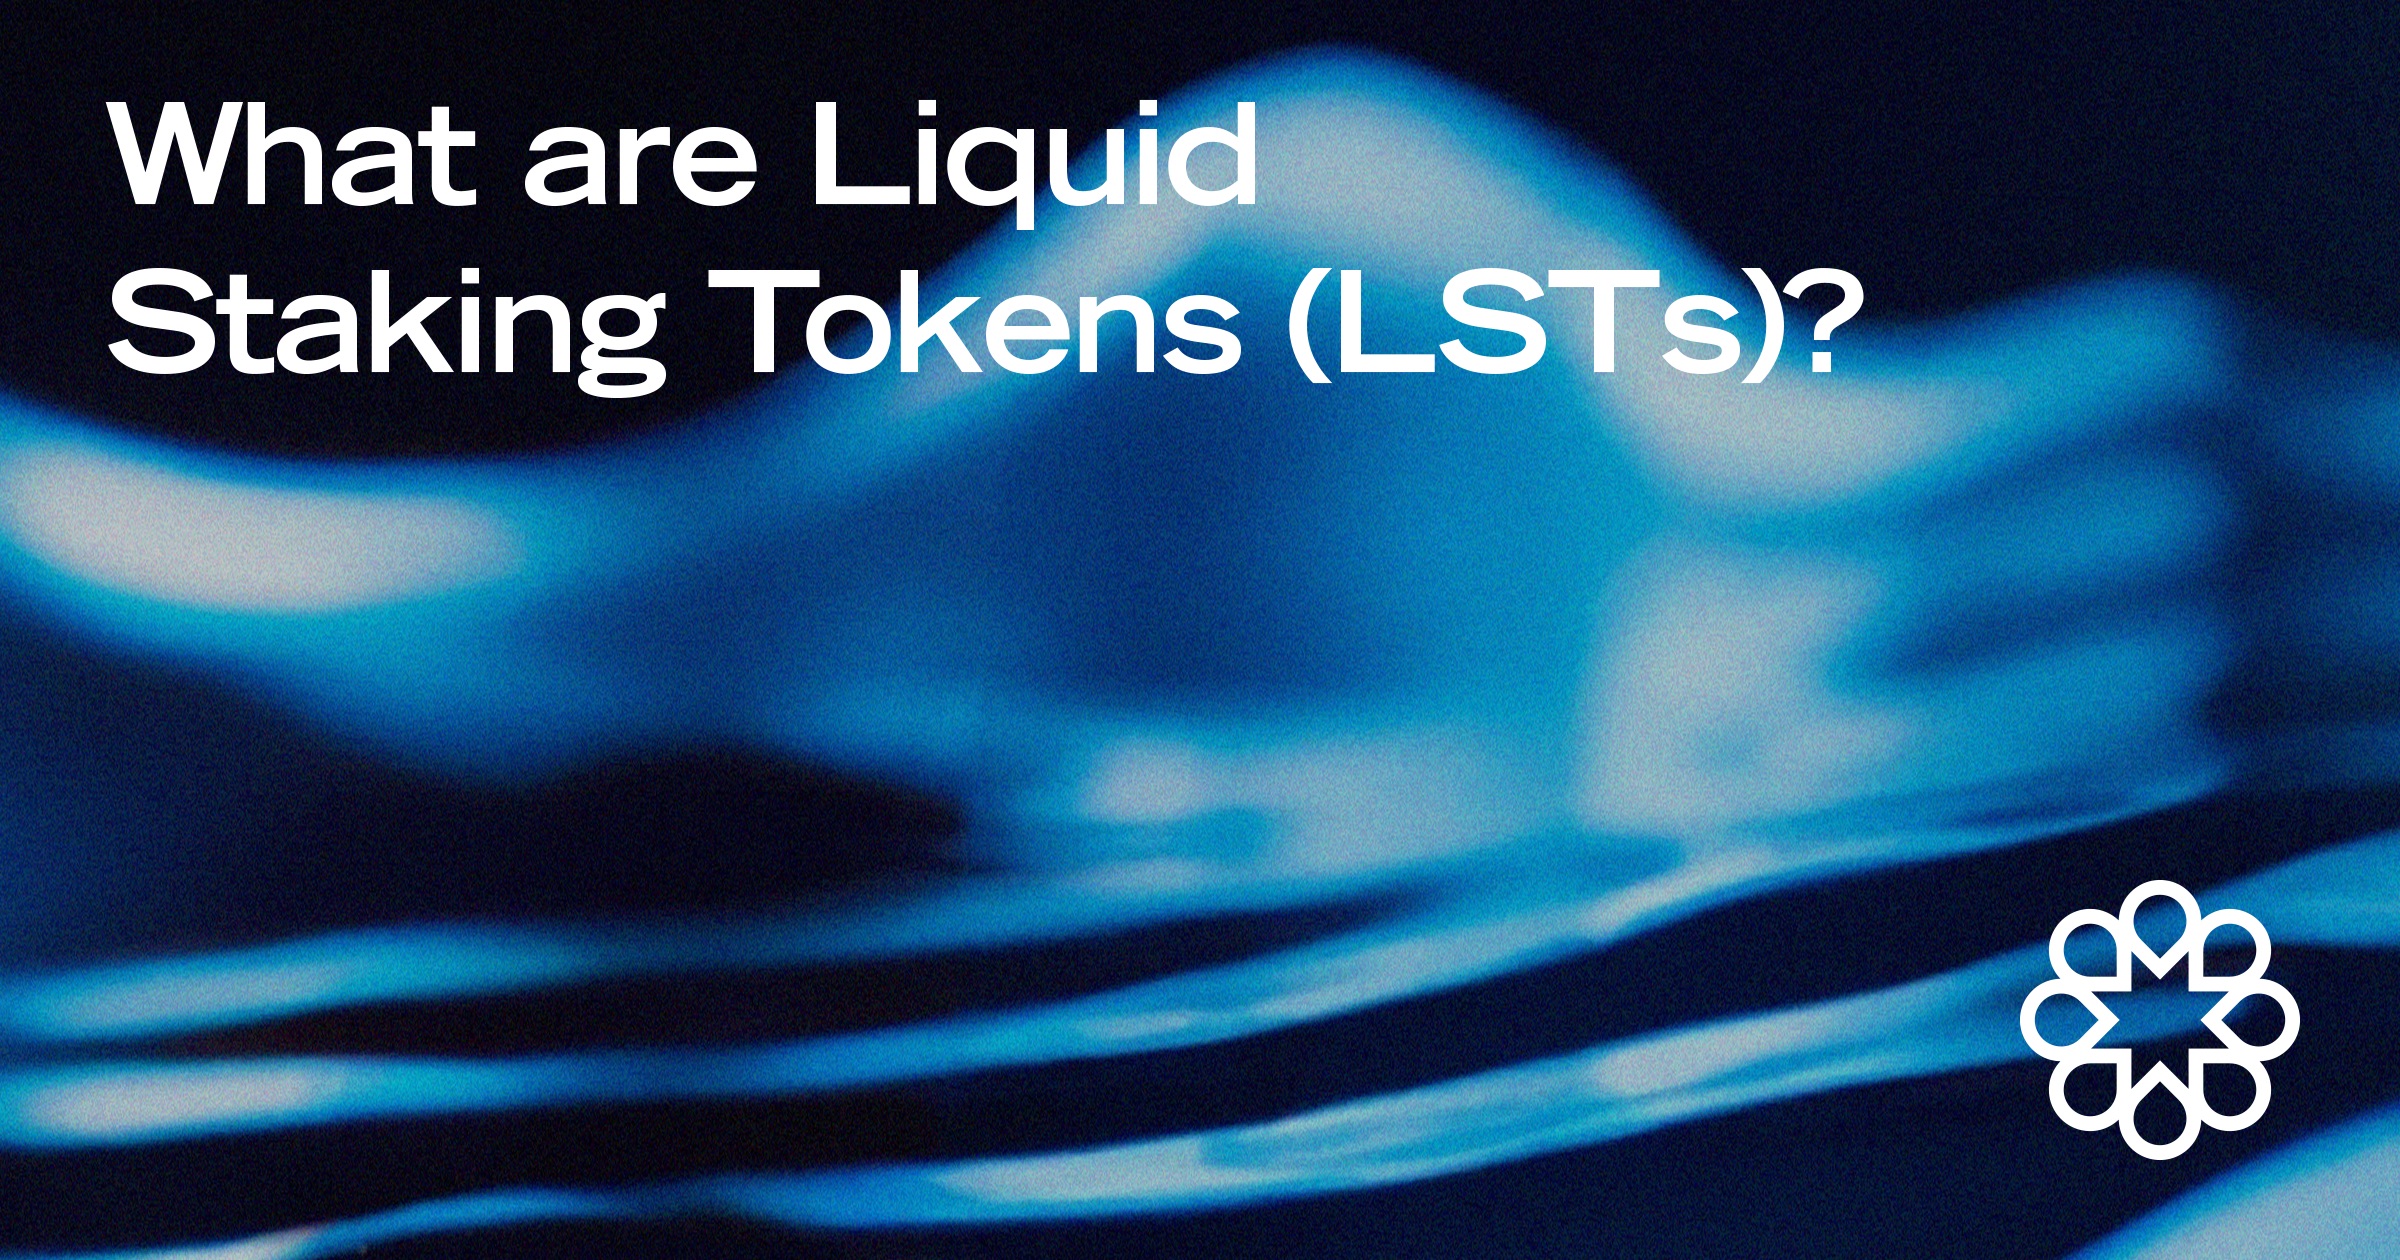 What are Liquid Staking Tokens (LSTs)?